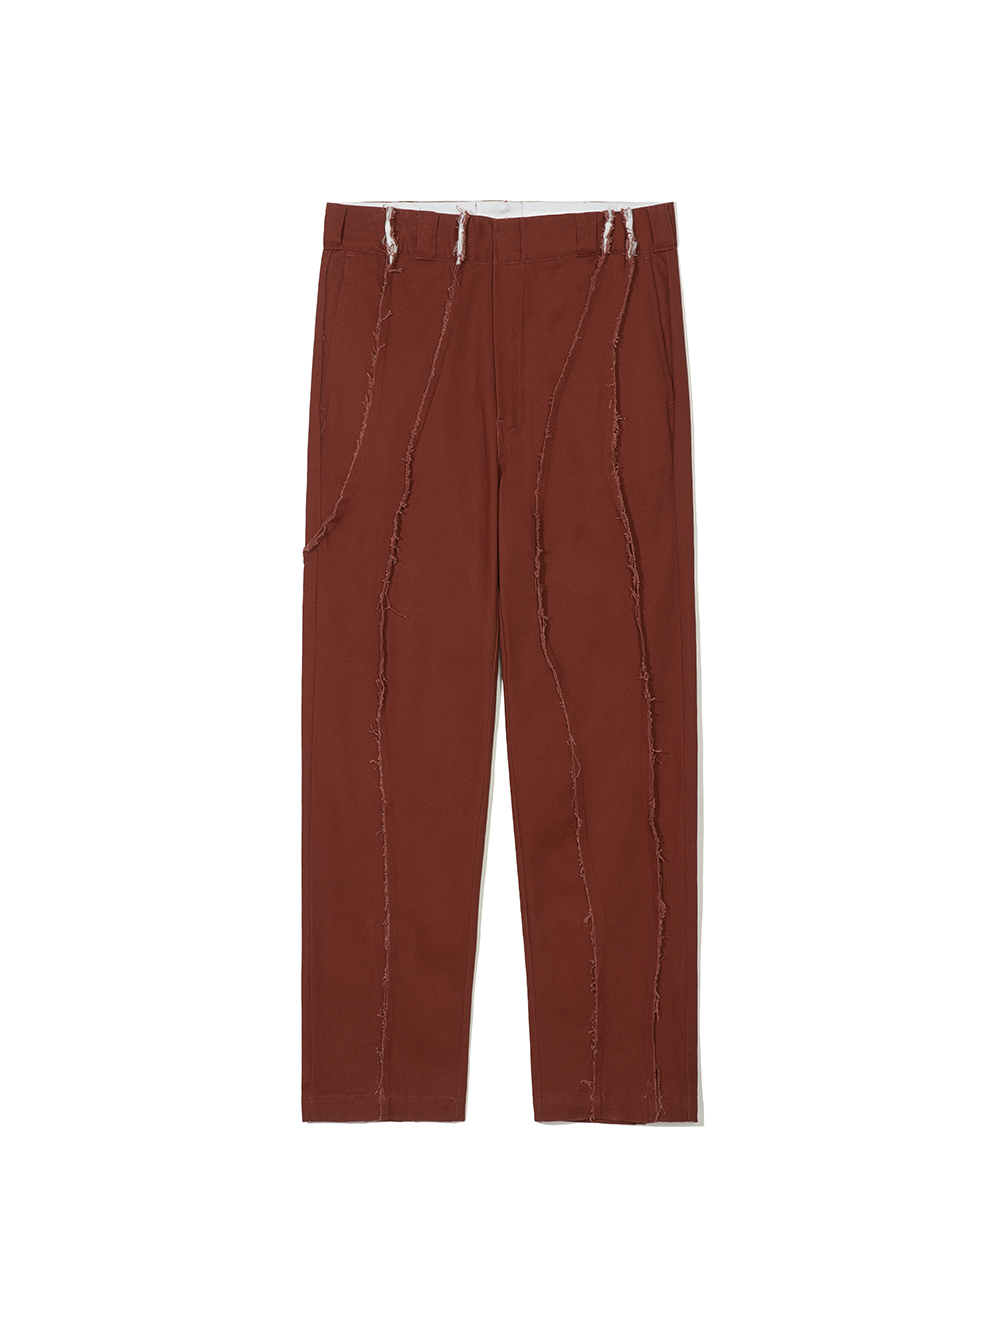 Partimento Curved Cut-off Chino Pants in Burnt Orange 